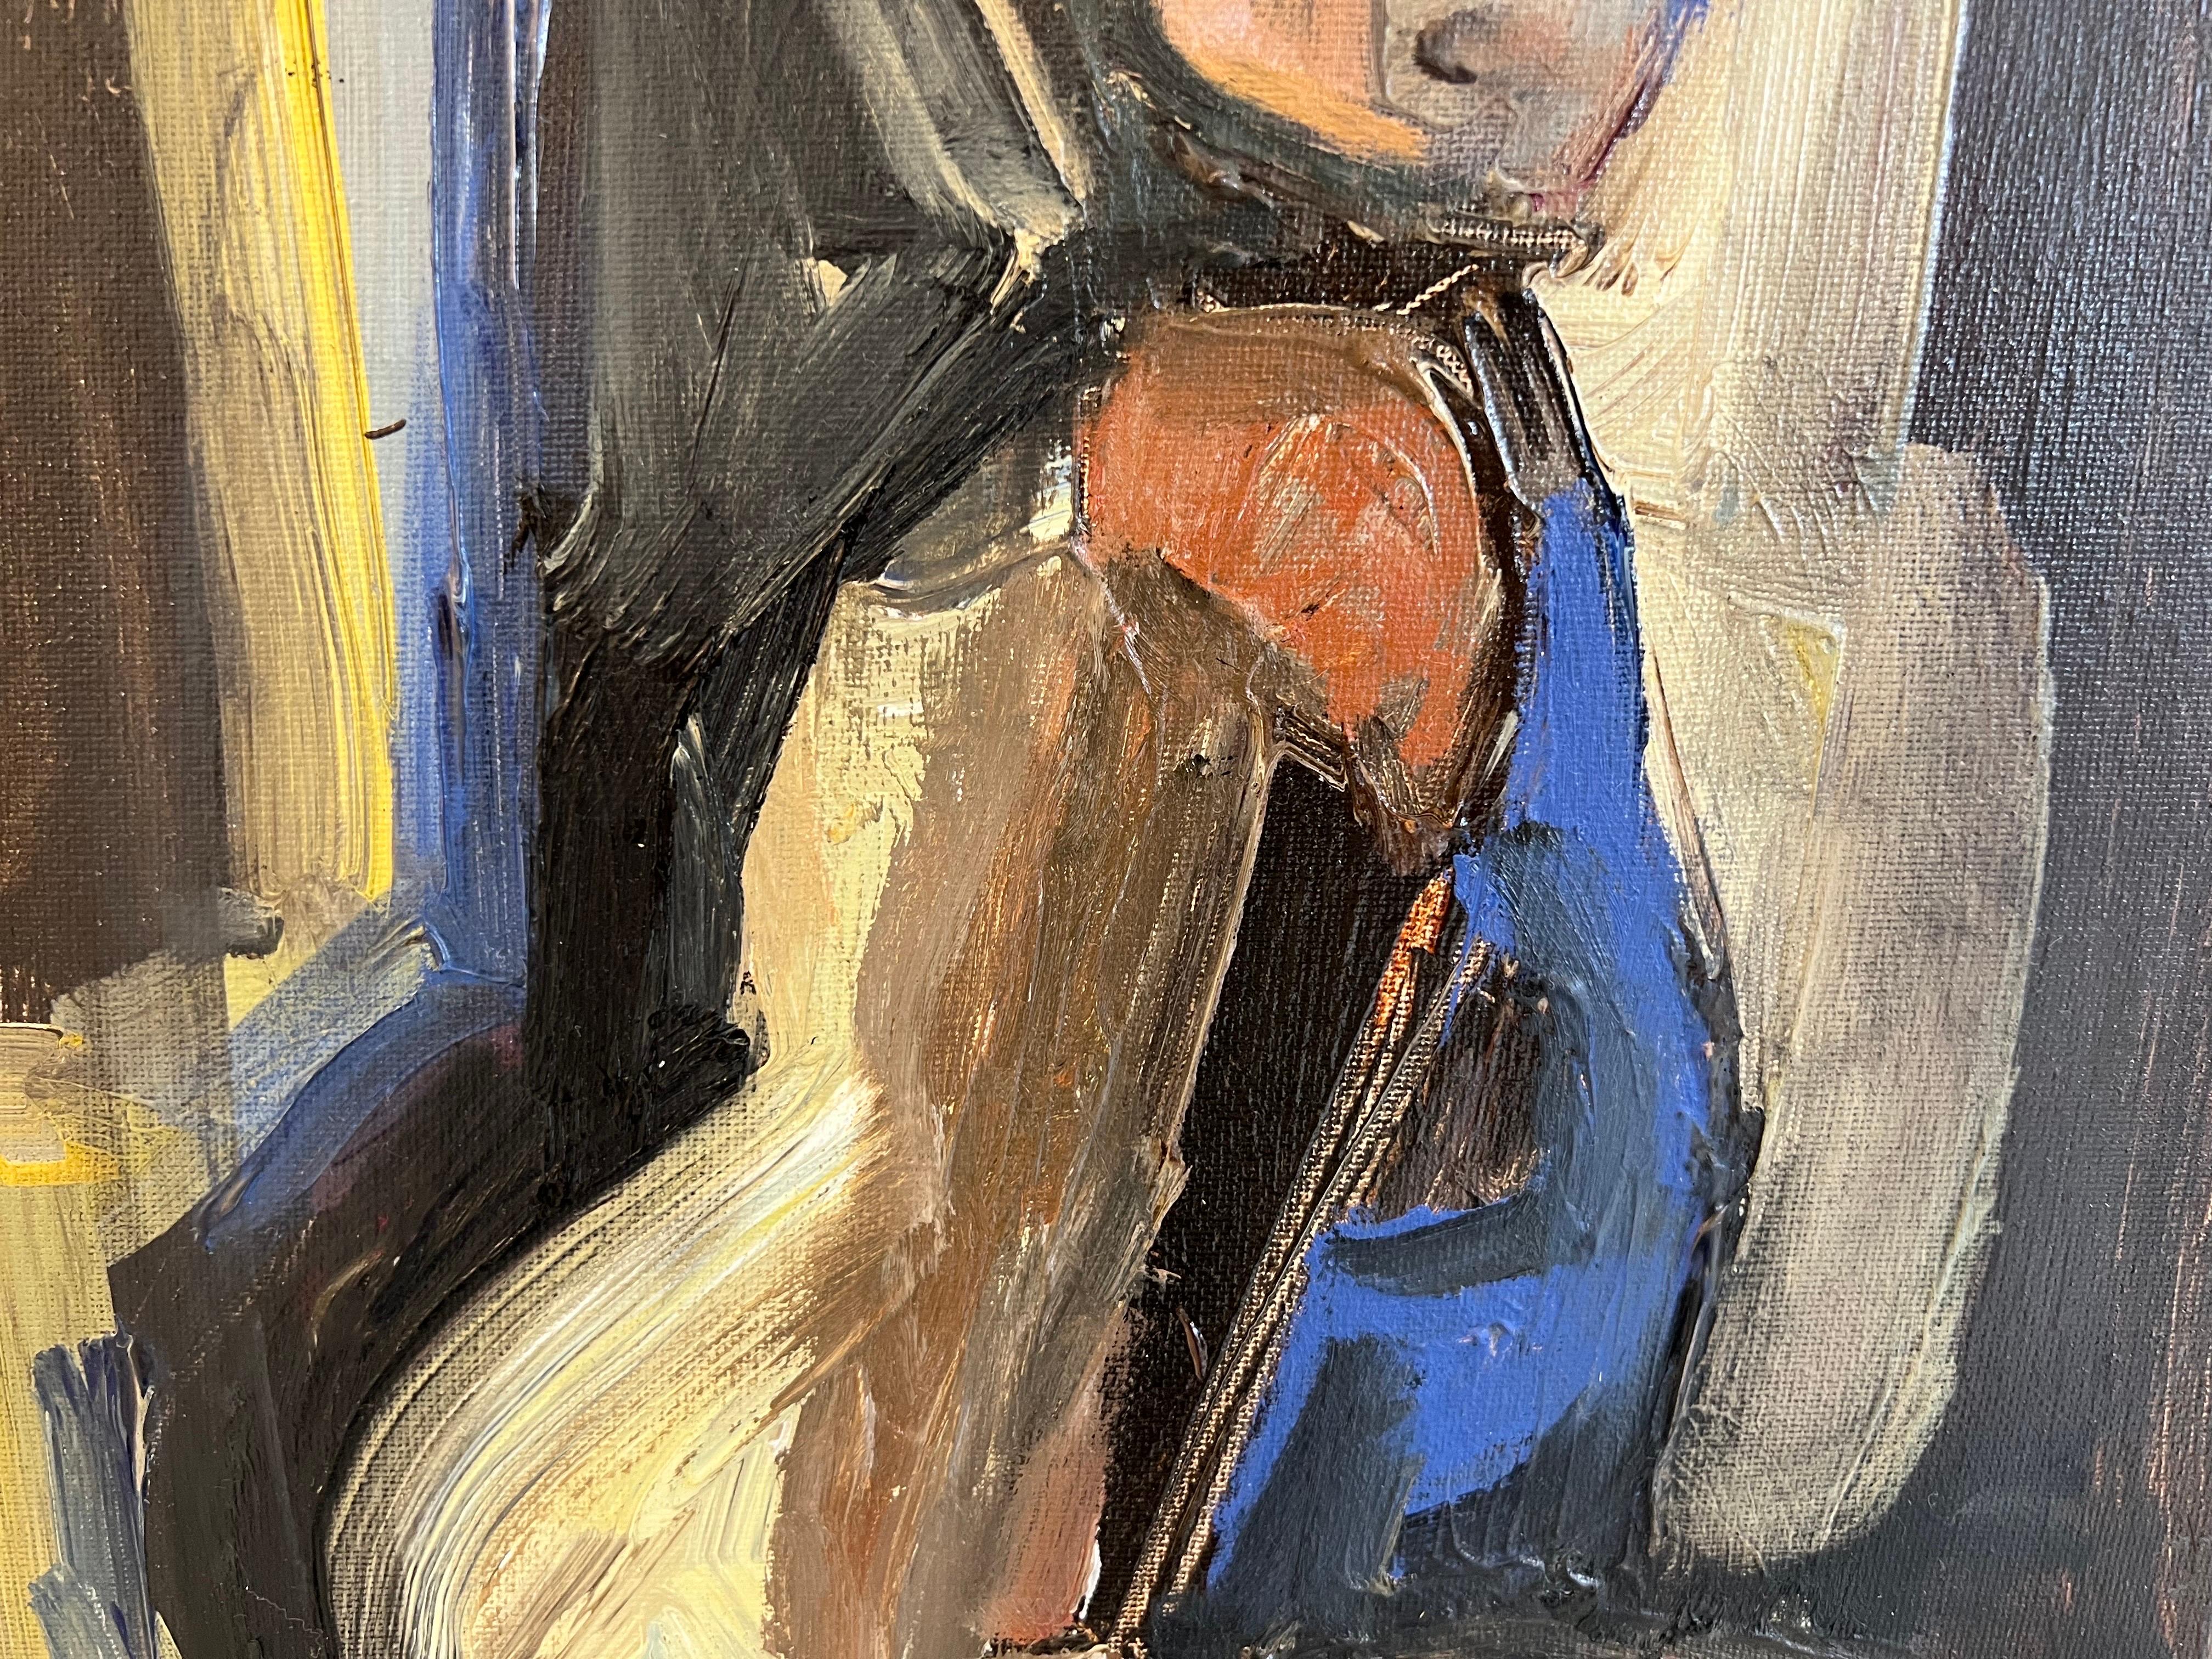 Small Moments by Anne Darby Parker, Contemporary Cubist Figure 3